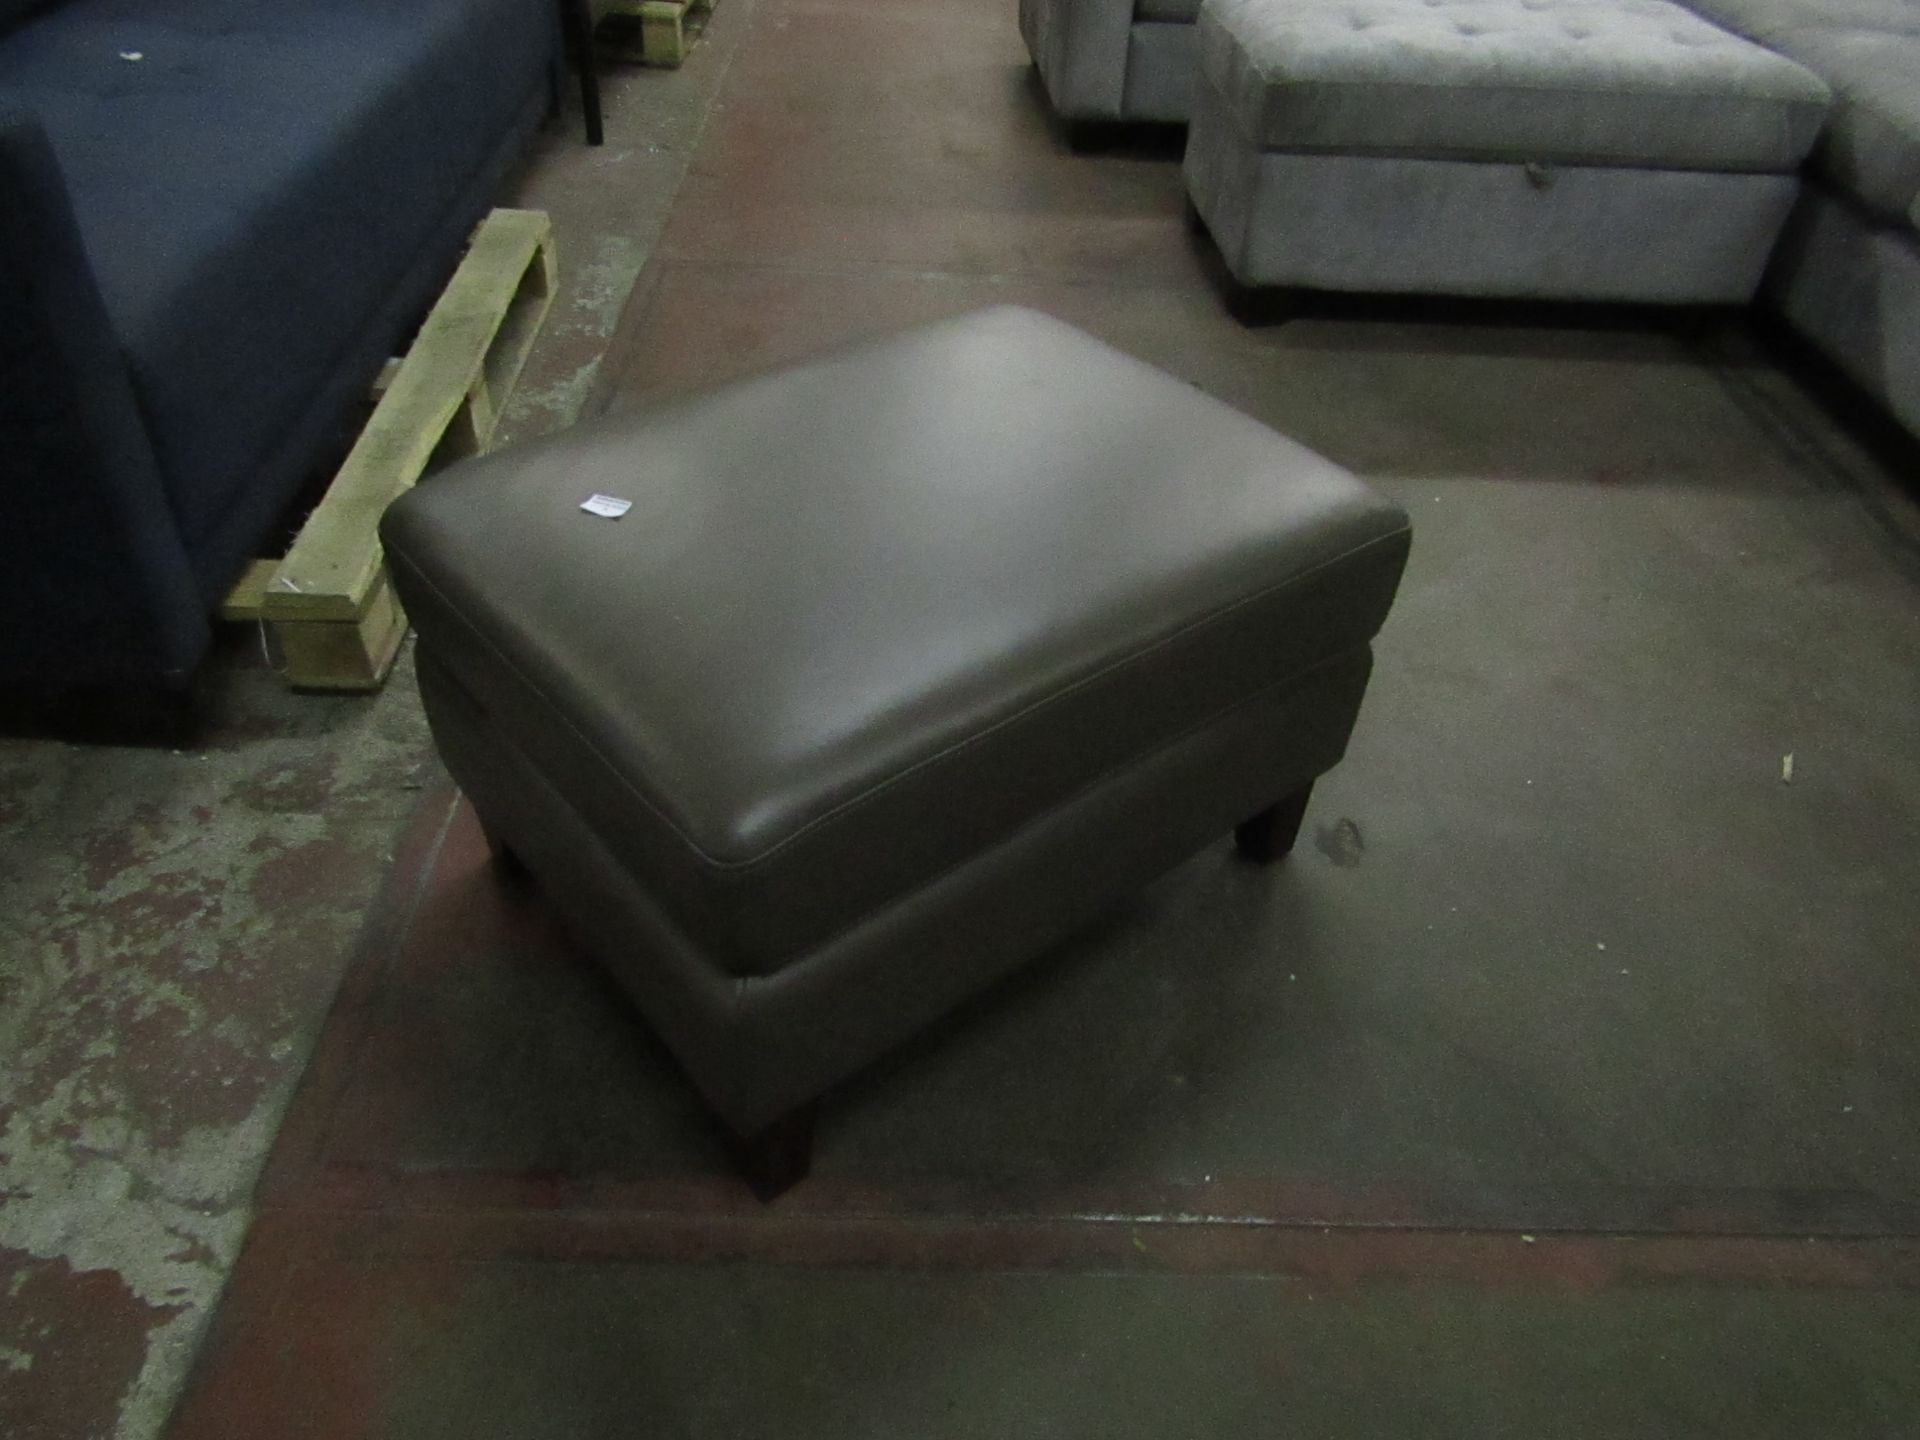 Costco Footstool in Brown Leather - Good conditon & has feet